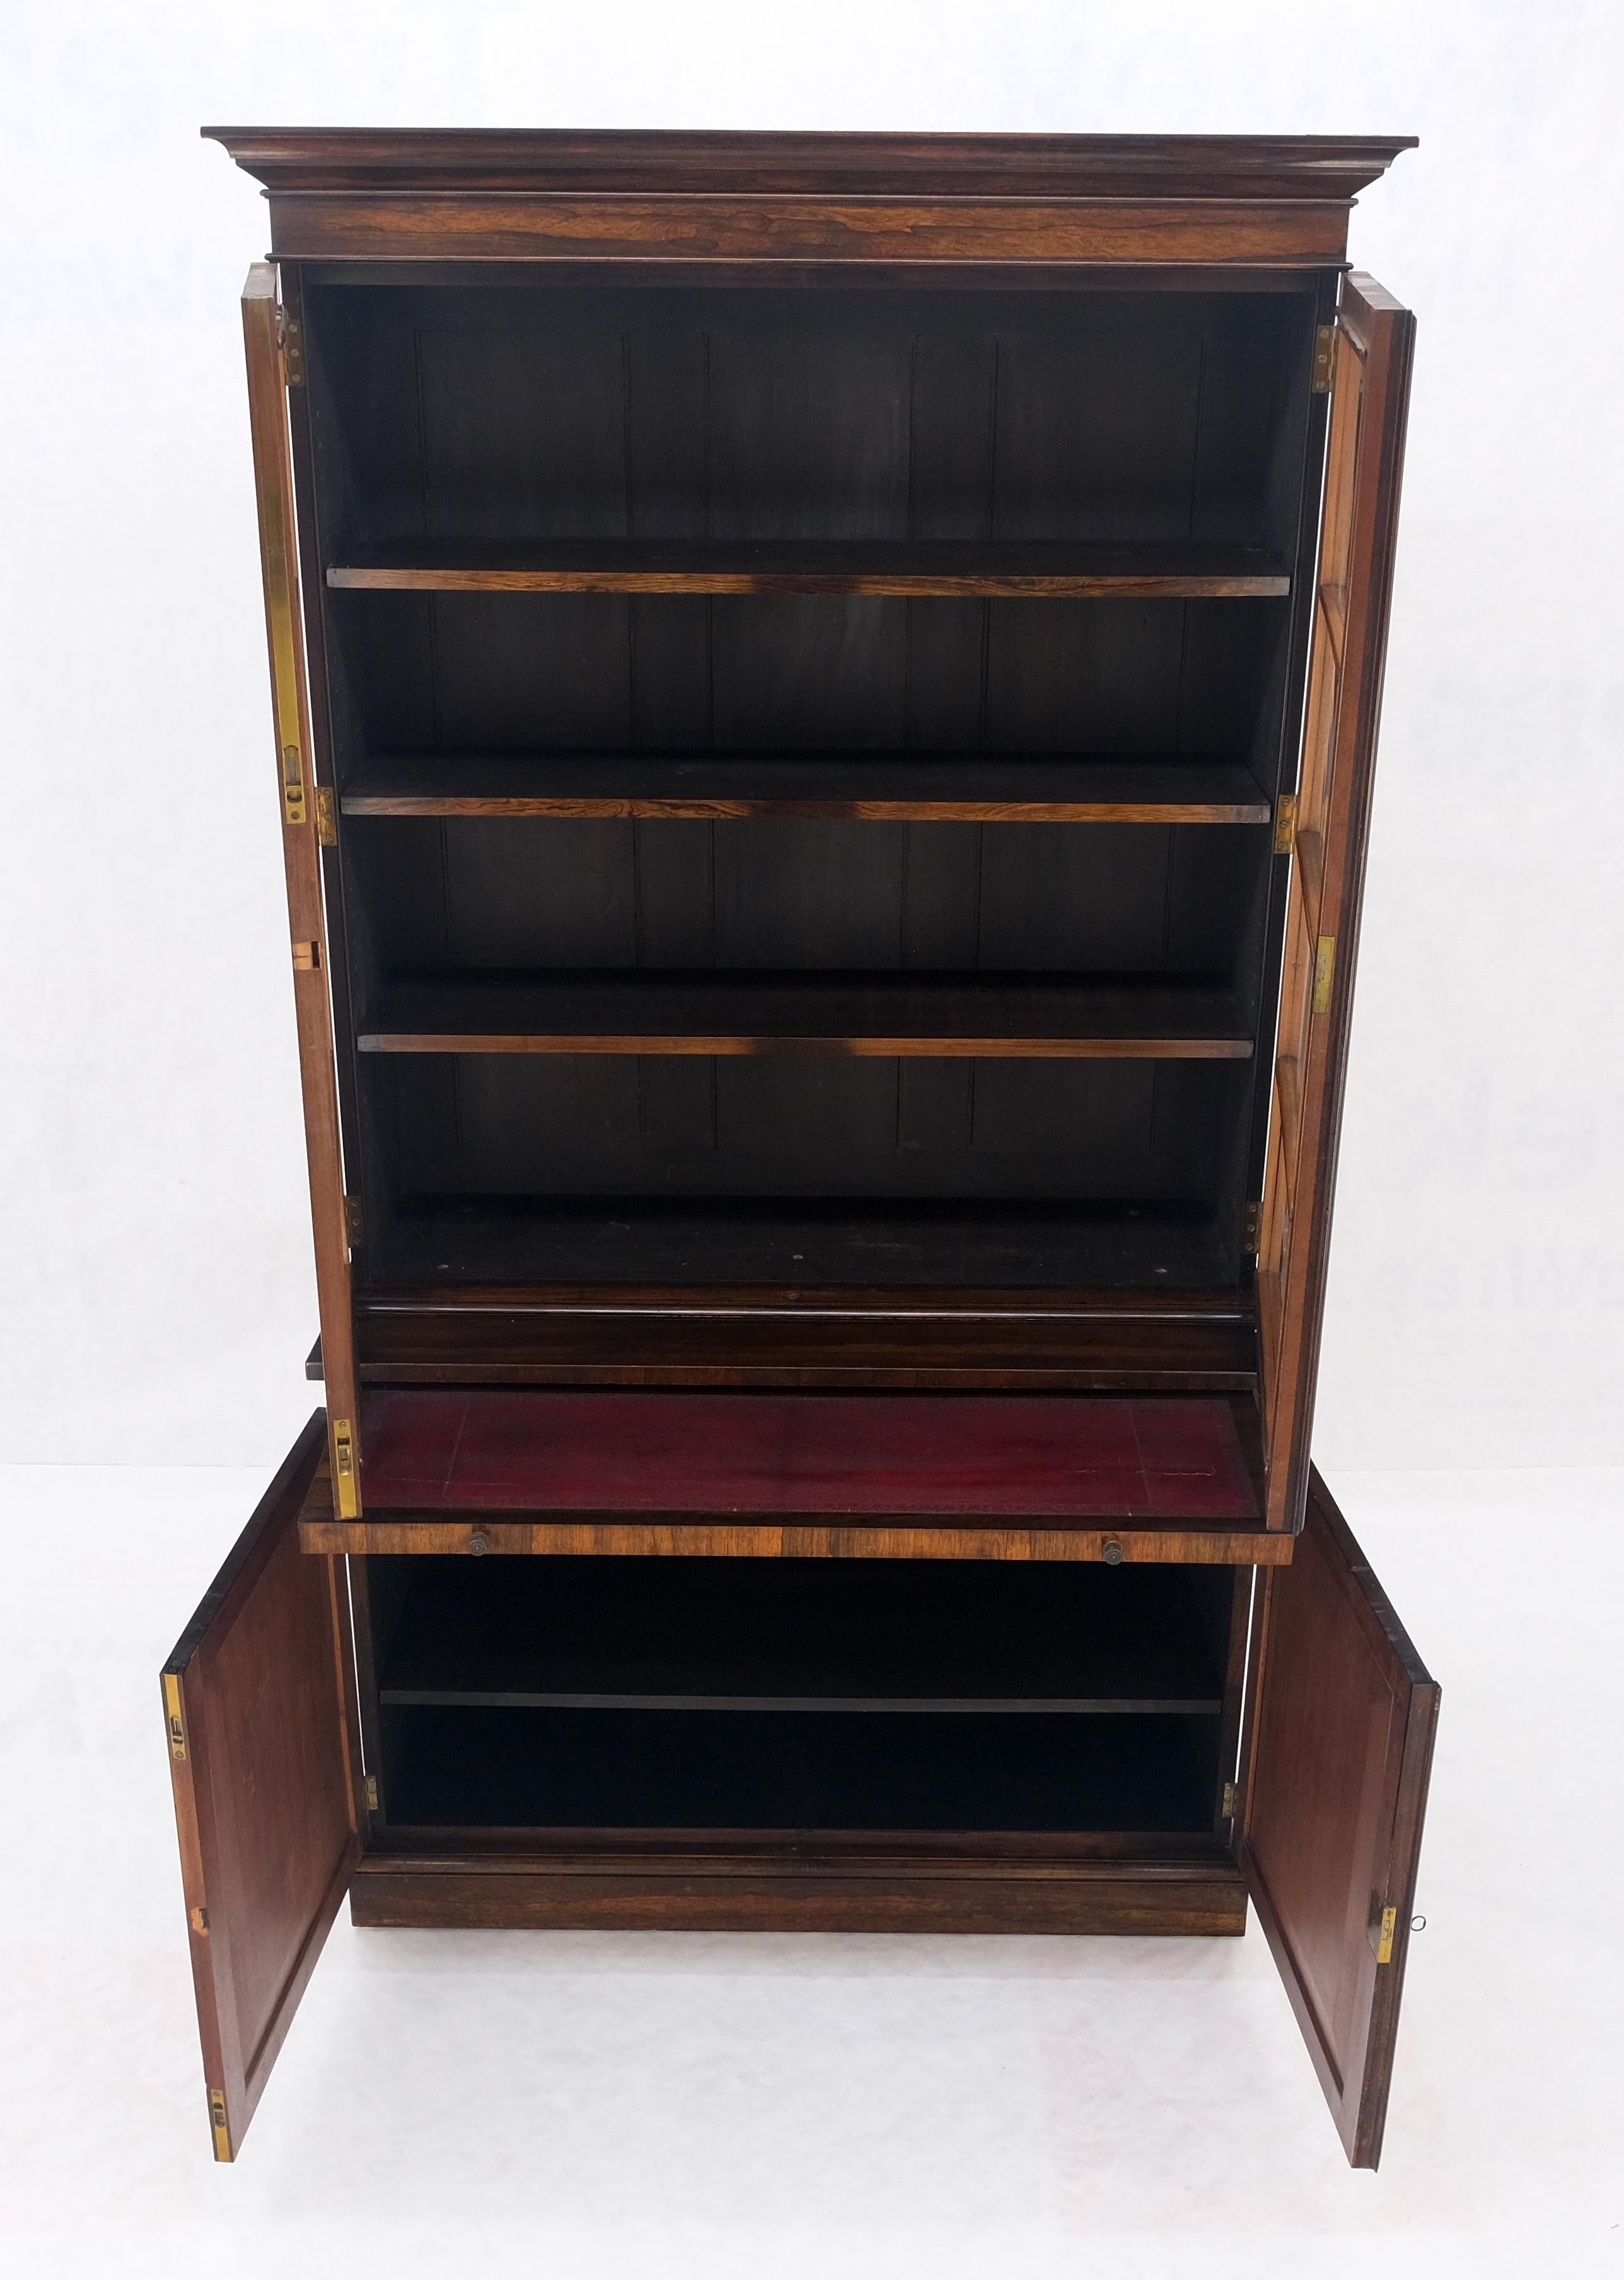 Brass All Rosewood Double Glass Doors Adjustable Shelves Pull Out Desk Secretary MINT! For Sale